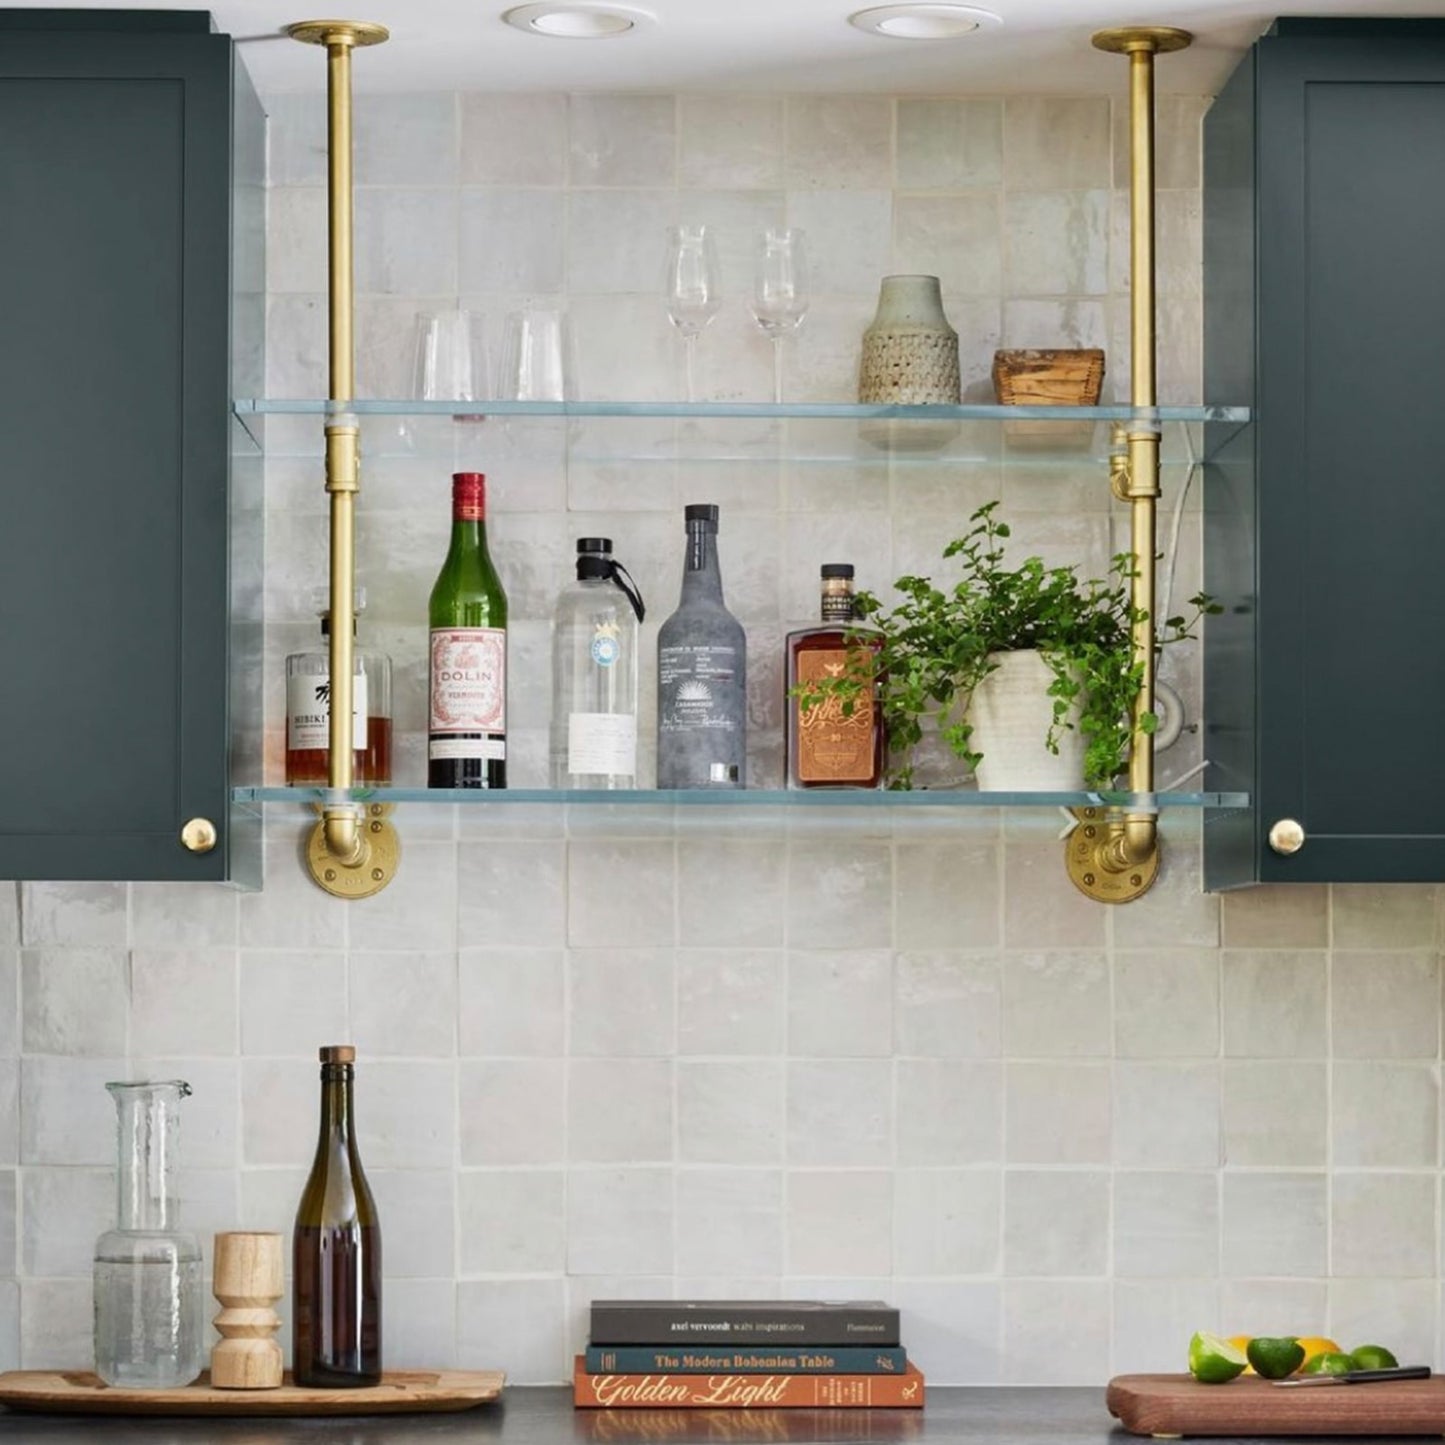 soil & oak small ceiling to wall kitchen shelving with brass plated pipes and glass shelves in between two cabinets